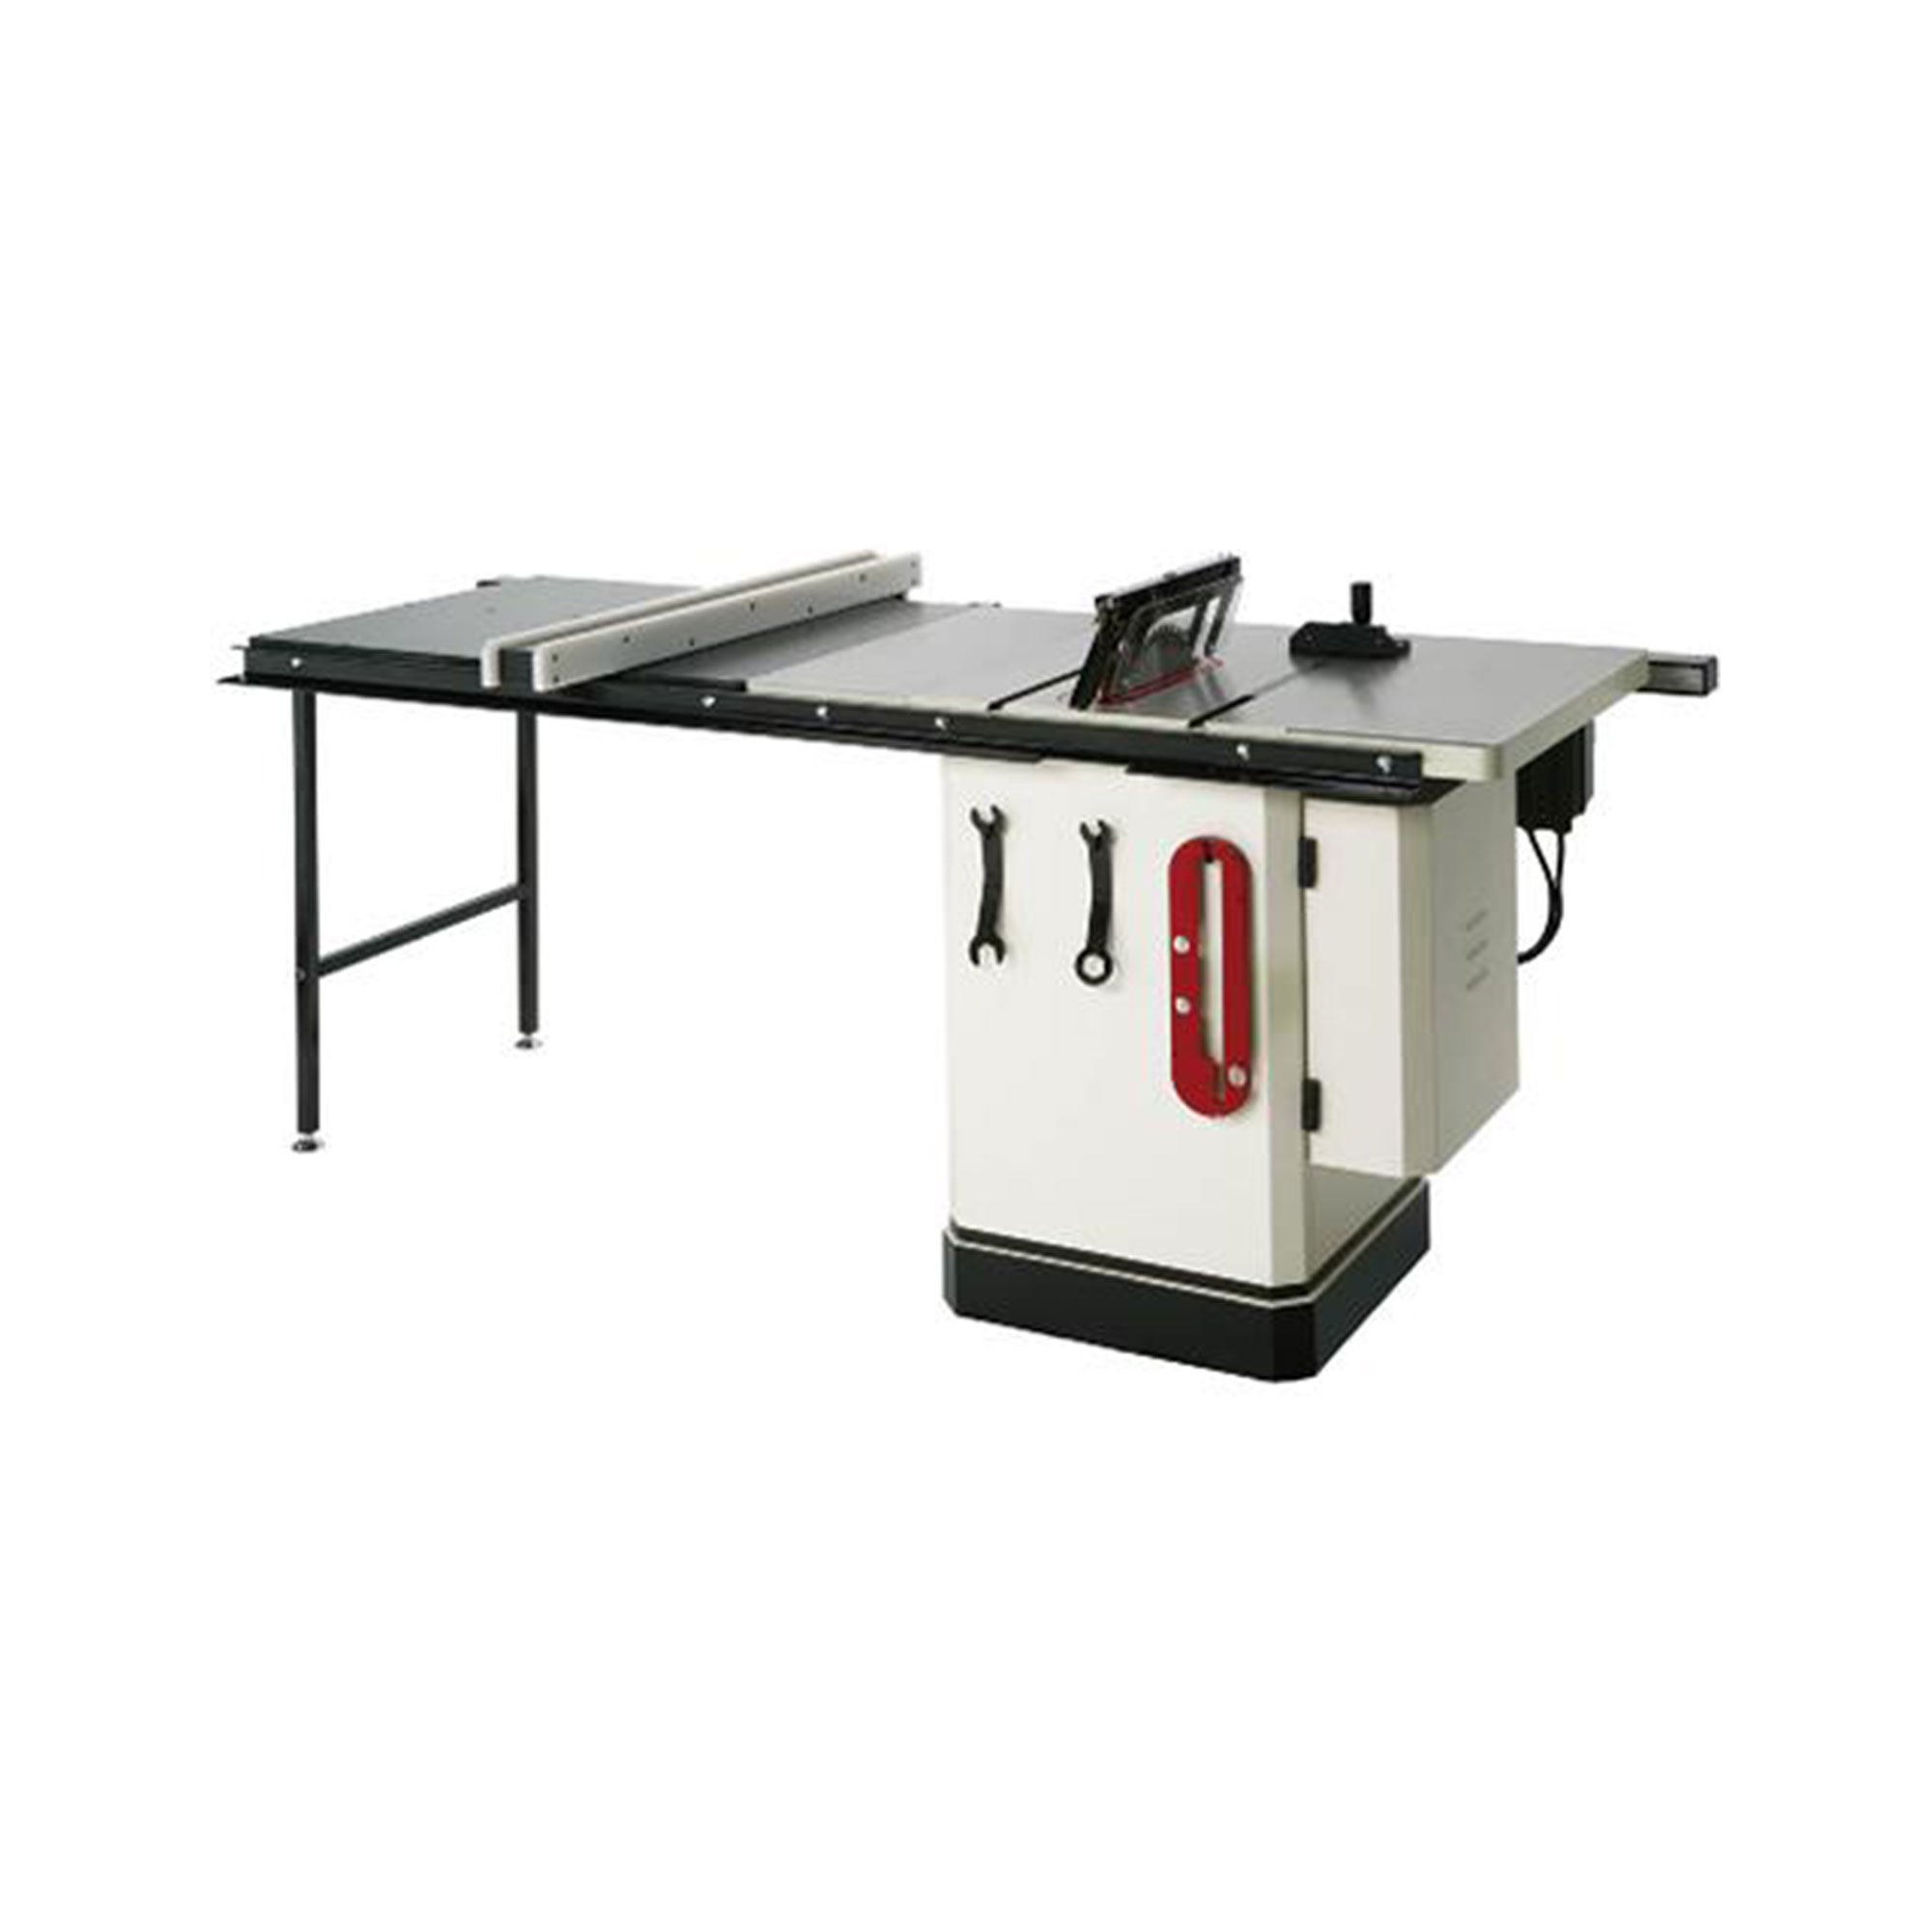 Shop Fox W1820 3-HP Cabinet Table Saw with Riving Knife and Long Rails, White - image 2 of 7